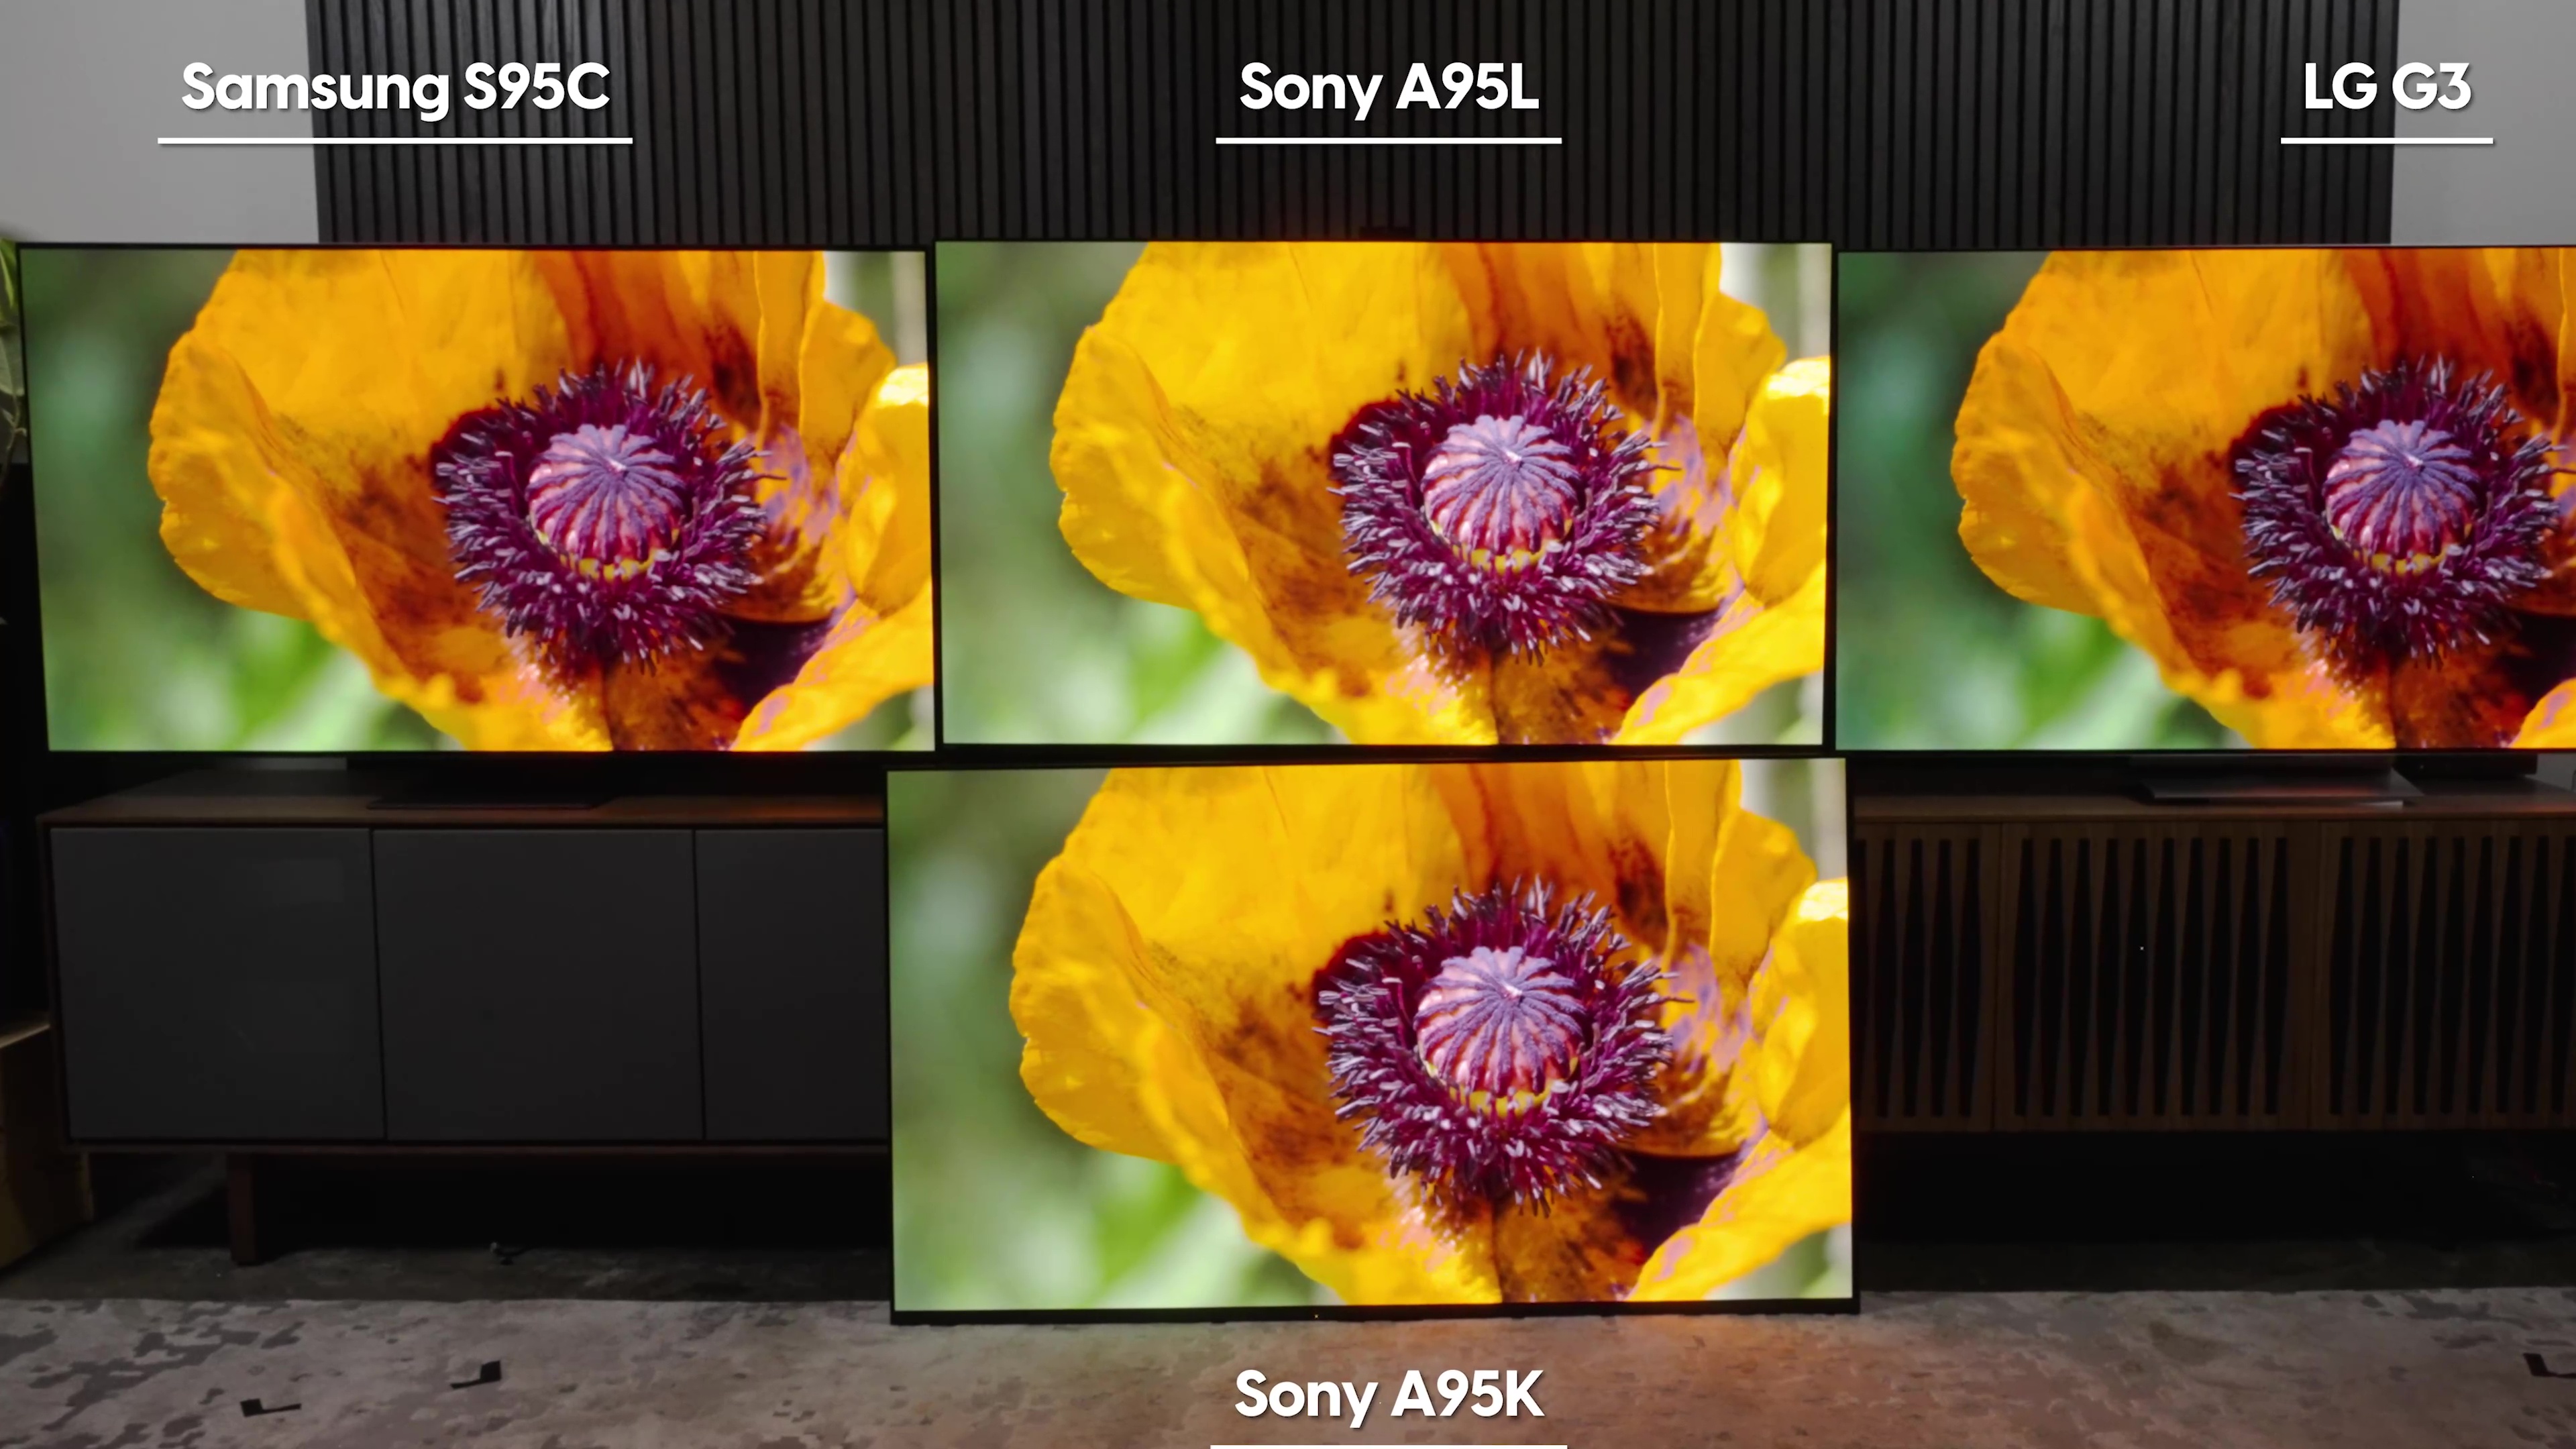 A yellow-orange flower in close up compared on a Samsung S95C, Sony A95L, LG G3, and Sonly A95K TV. 